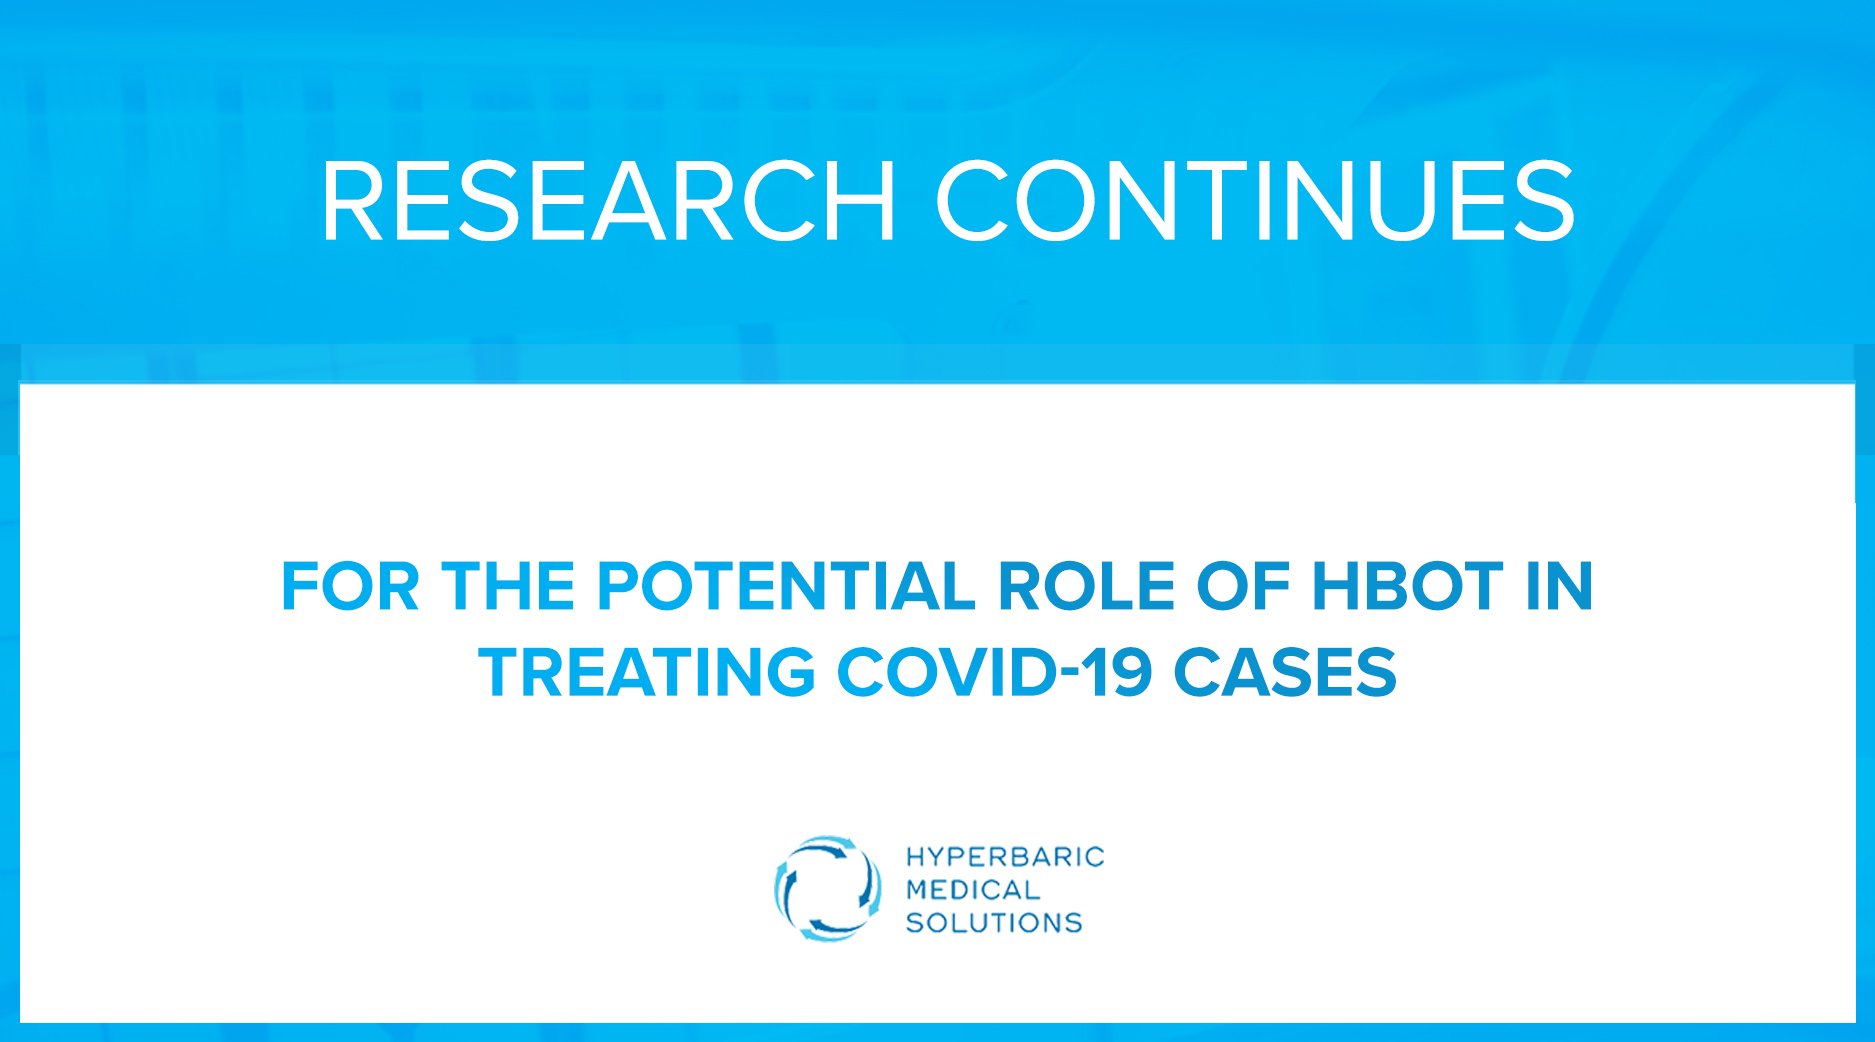 For-The-Potential-Role-of-HBOT-in-Treating-COVID-19-Cases---Text-Graphic